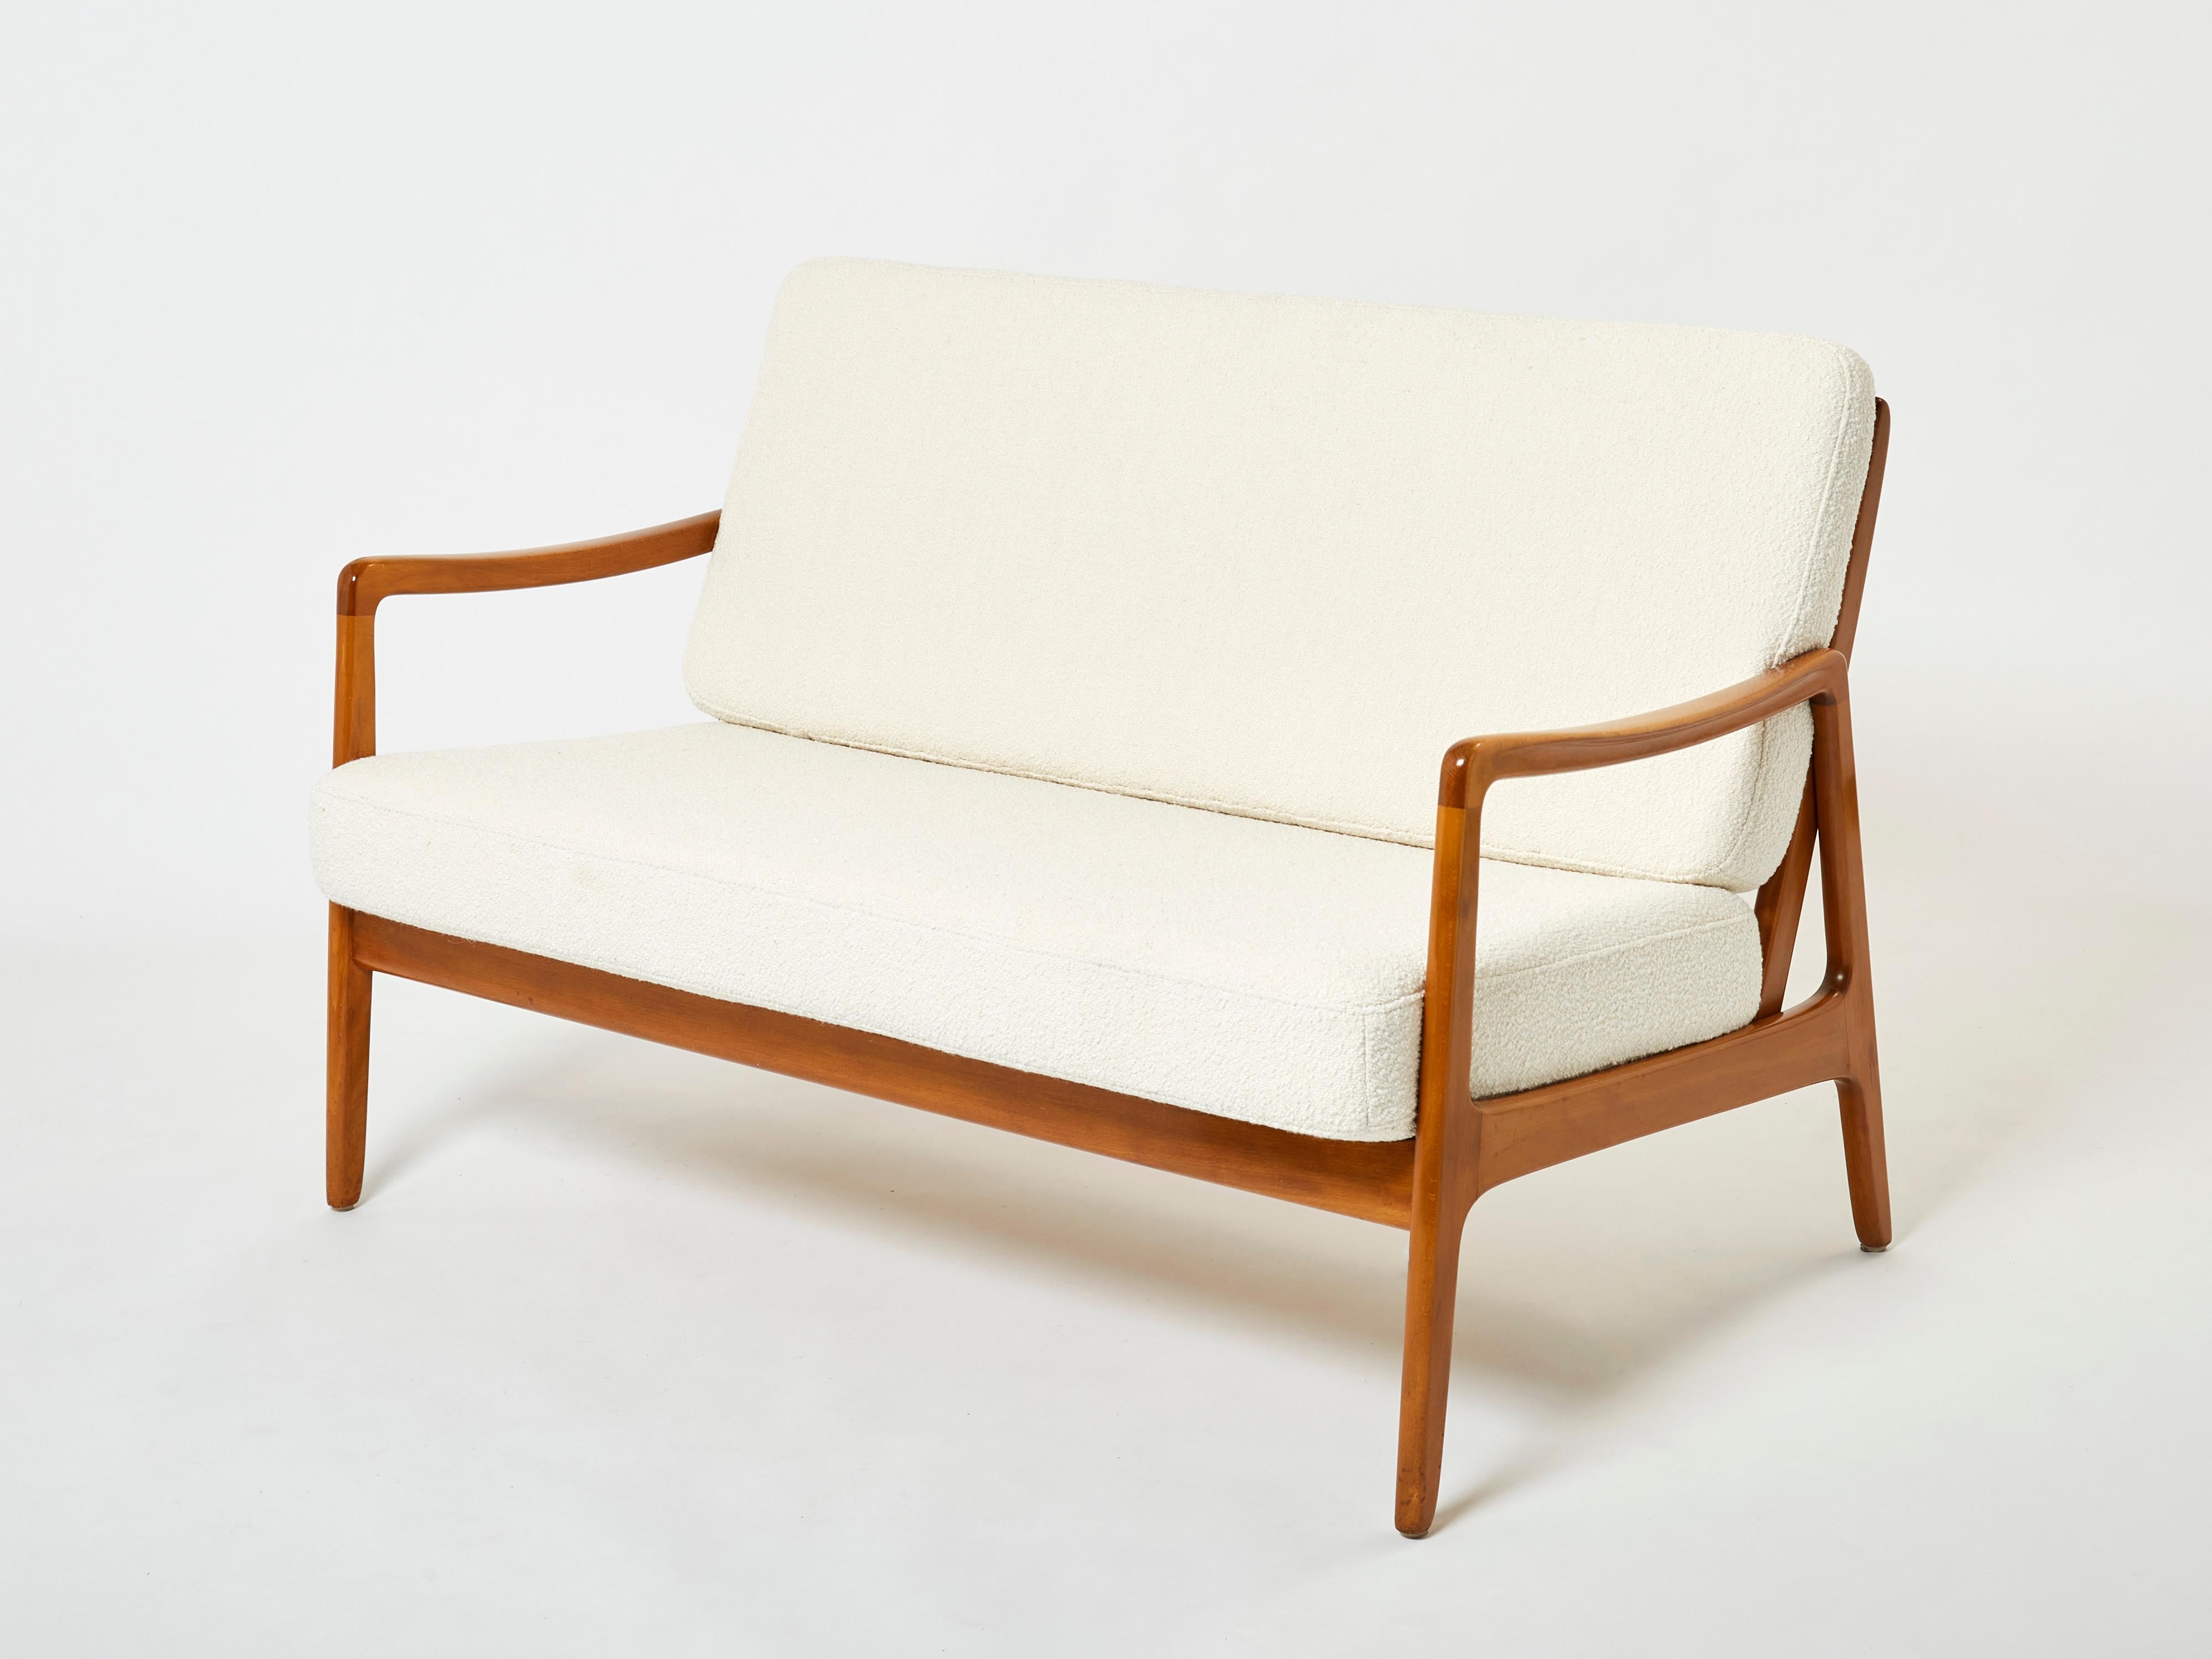 Renowned Danish designer Ole Wanscher is credited for being influential during the height of the acclaimed Scandinavian design movement that took place during the Mid-century era. His FD 109 sofa, designed during the 1960s for respected Danish